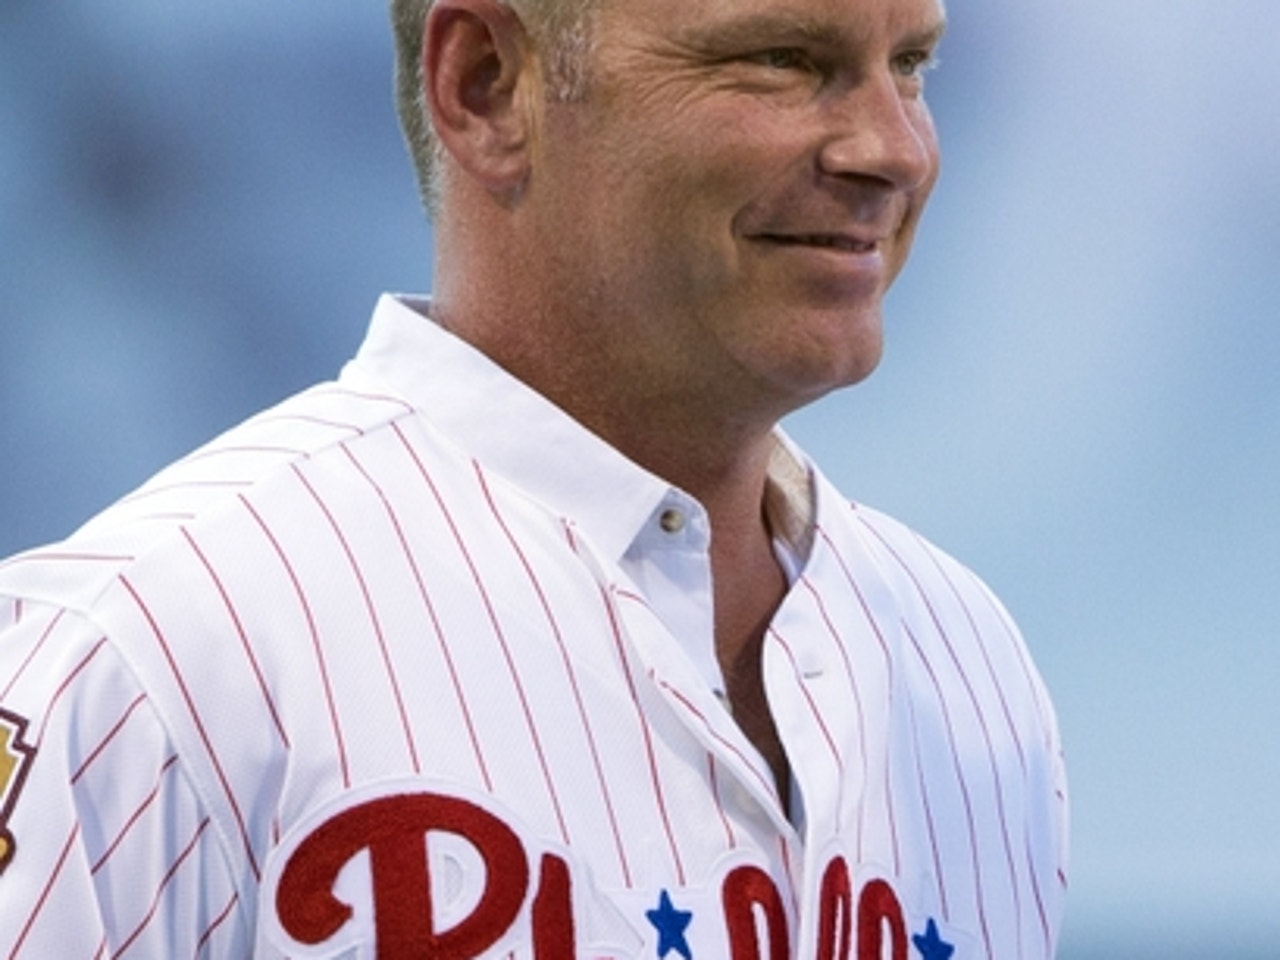 Phillies Philography: Mike Lieberthal